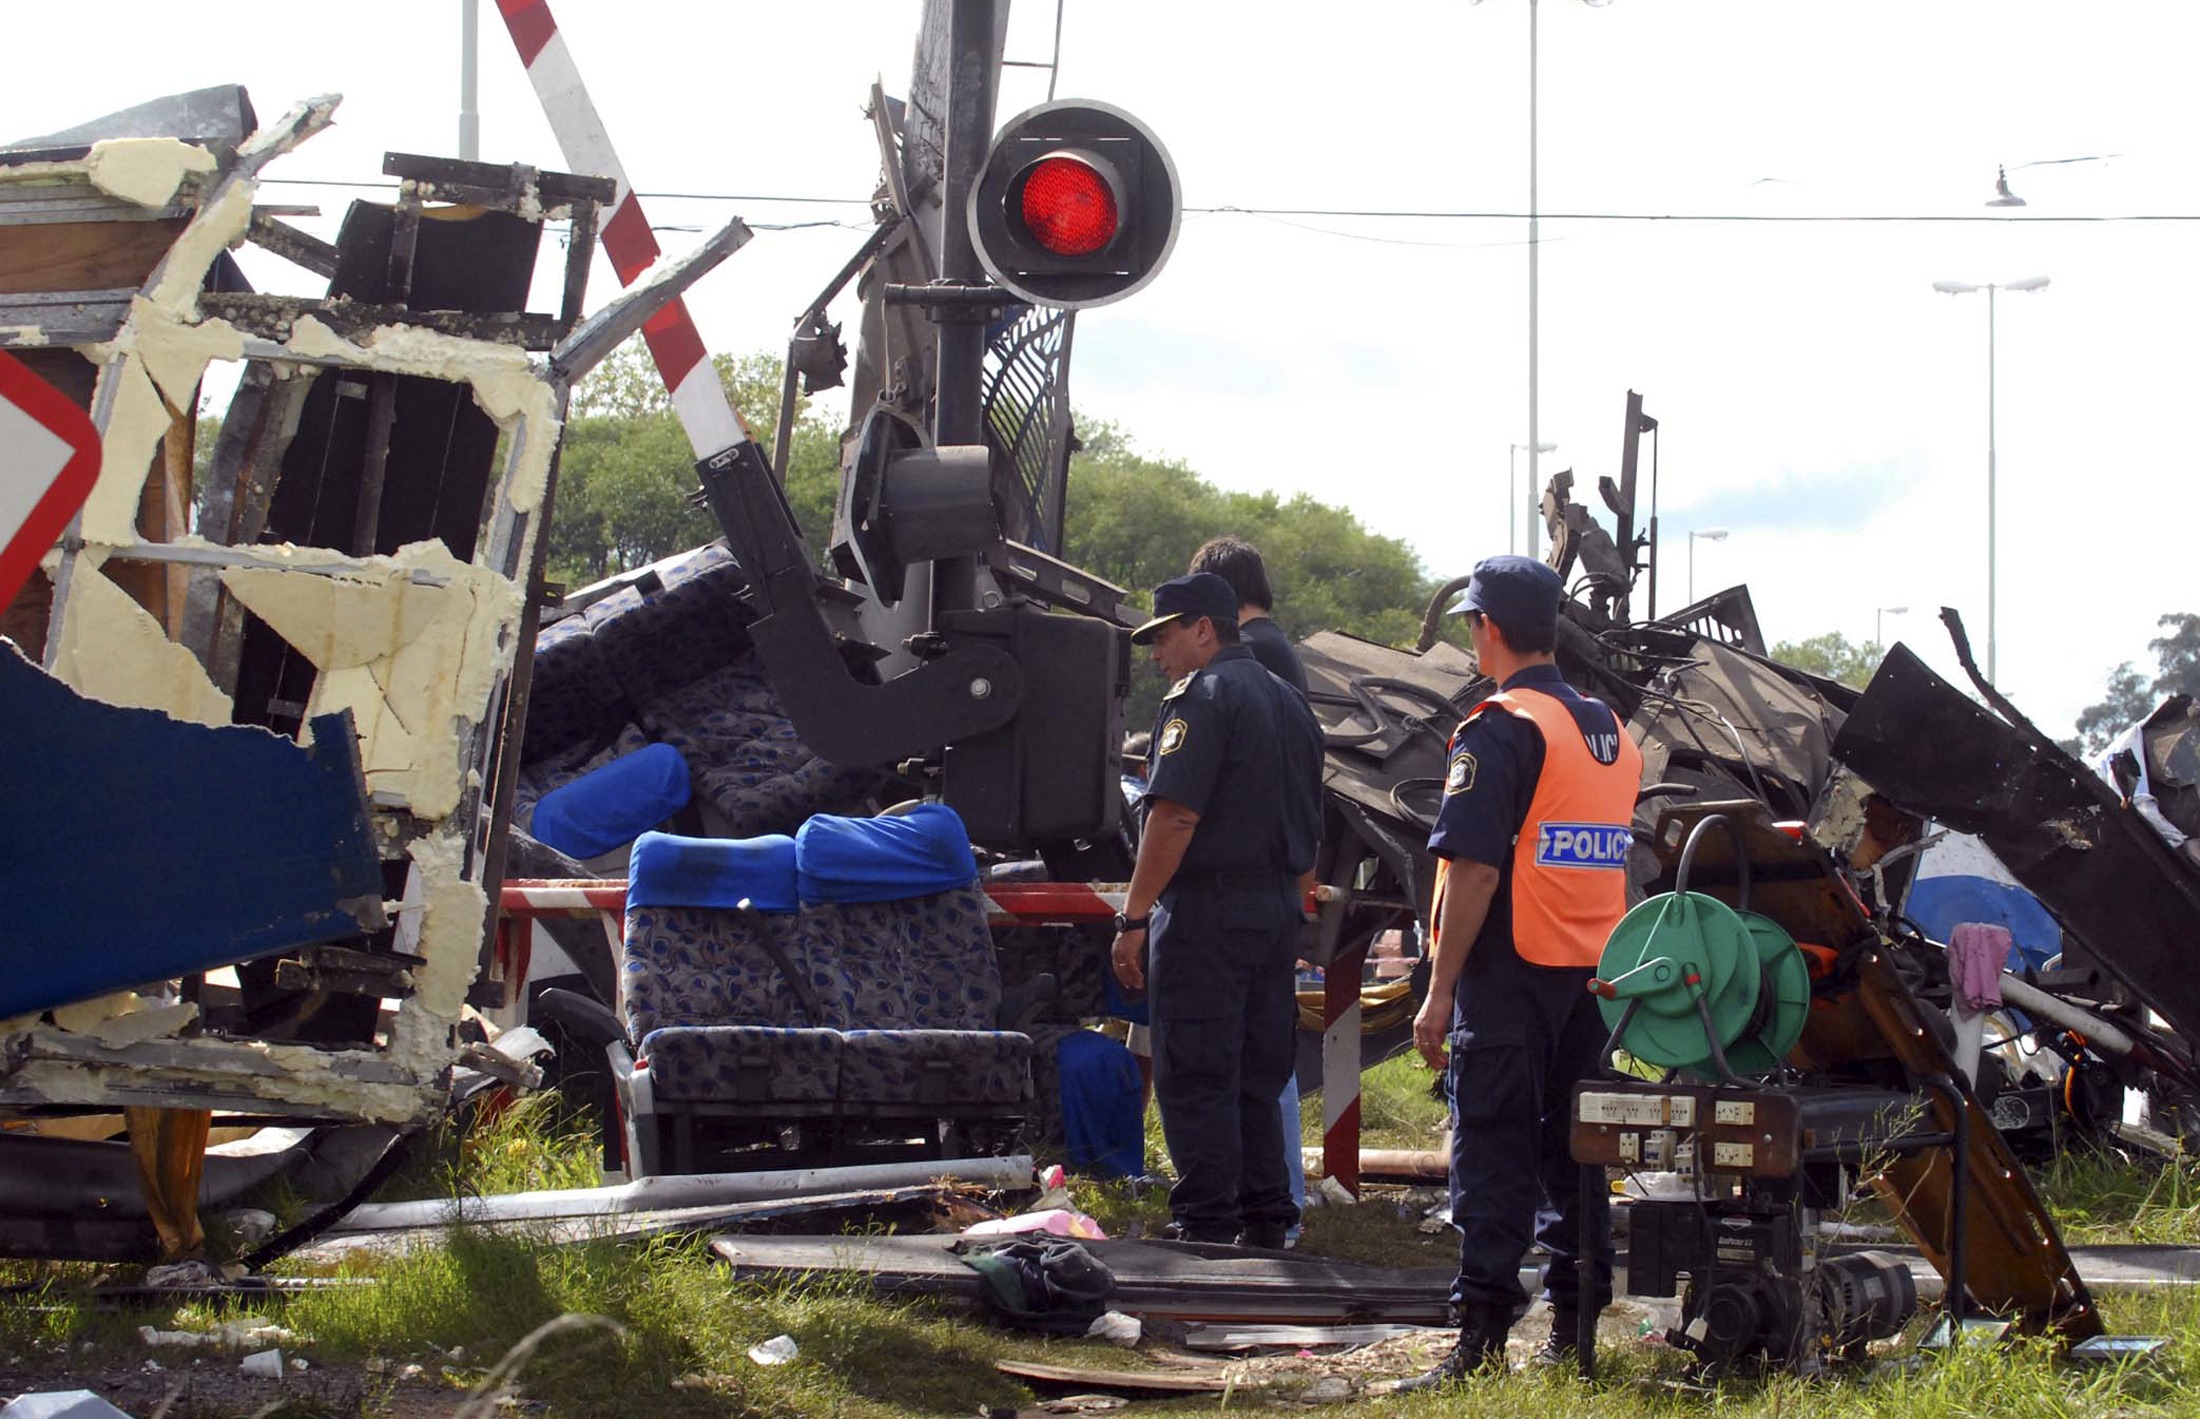  ... train crashed into a bus in dolores buenos aires province argentina